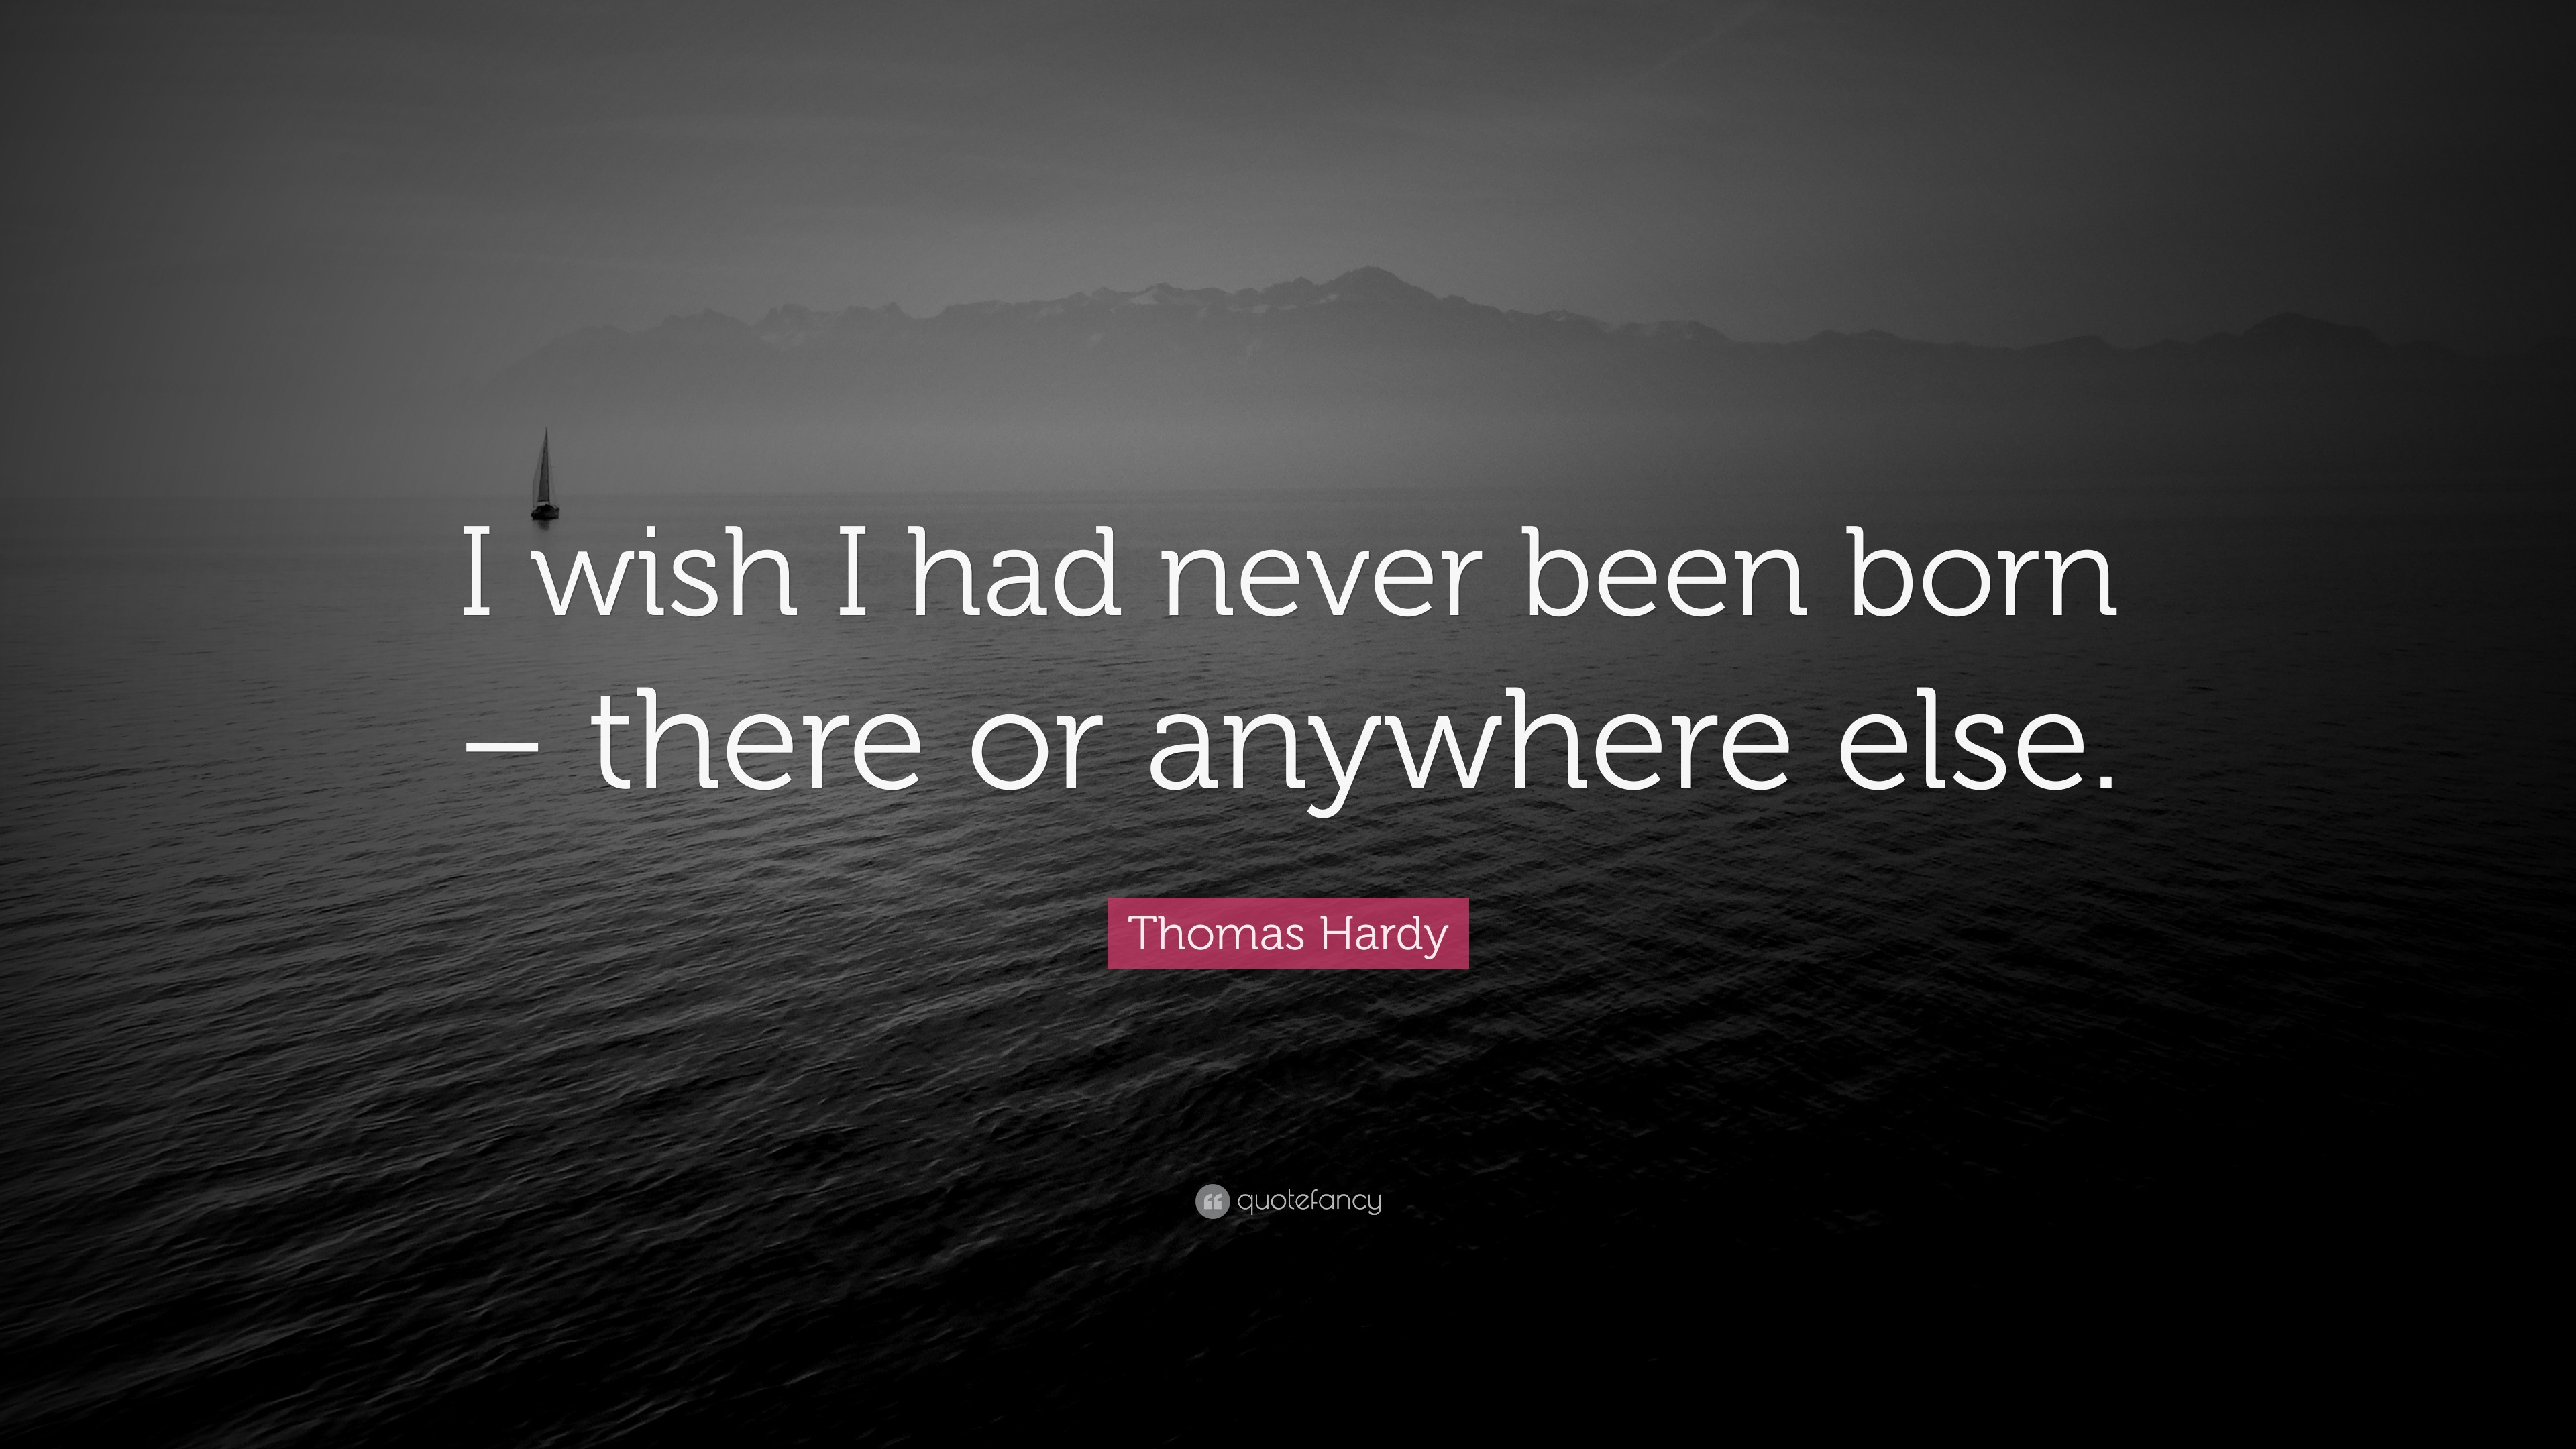 Thomas Hardy Quote: “I wish I had never been born – there or anywhere